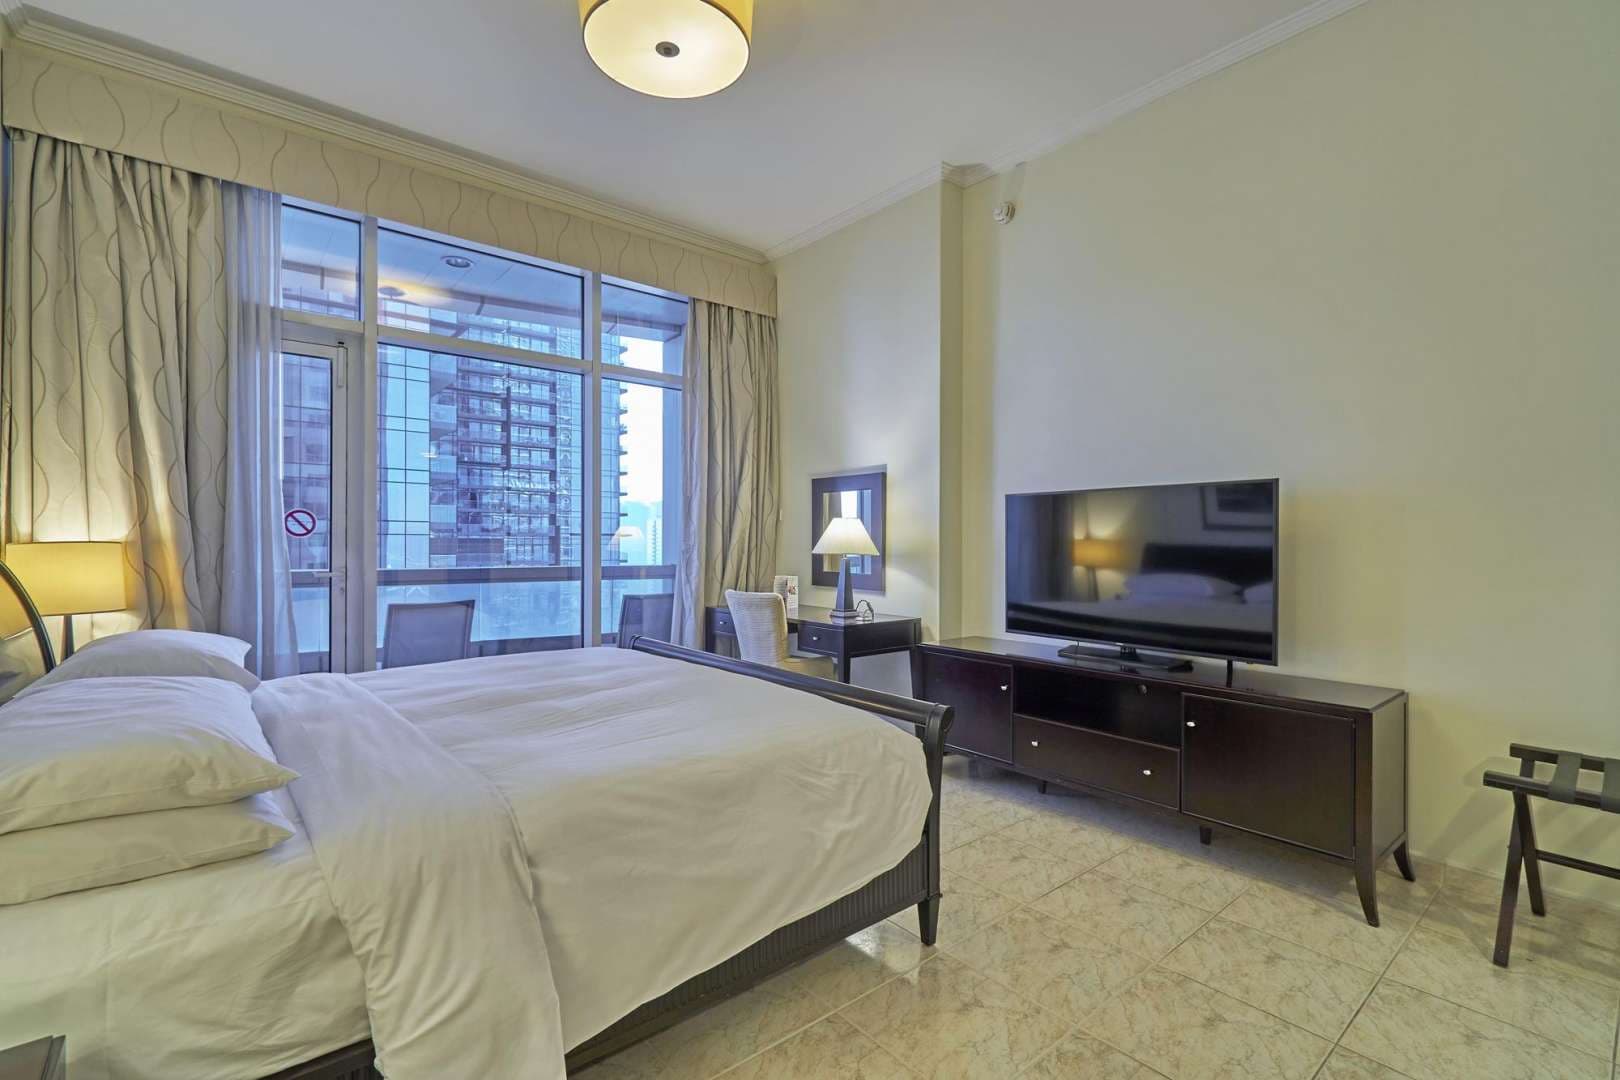 2 Bedroom Serviced Residences For Rent Marriott Harbour Hotel And Suites Lp05692 1700fa6aa2133c00.jpg